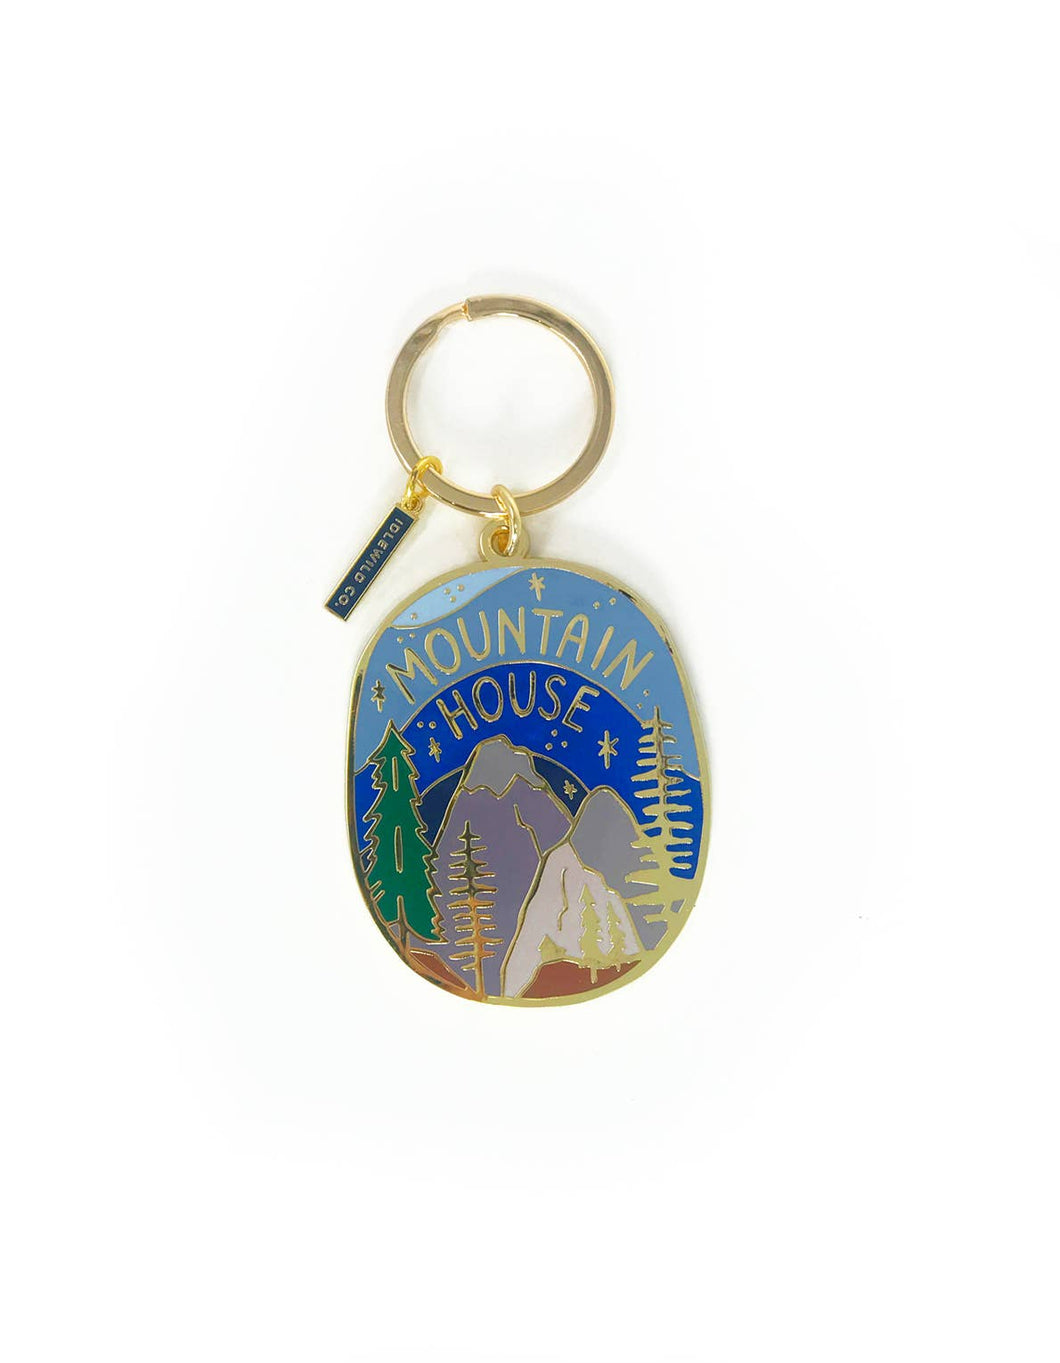 Idlewild Co. - Mountain House Keychain - Unboxed